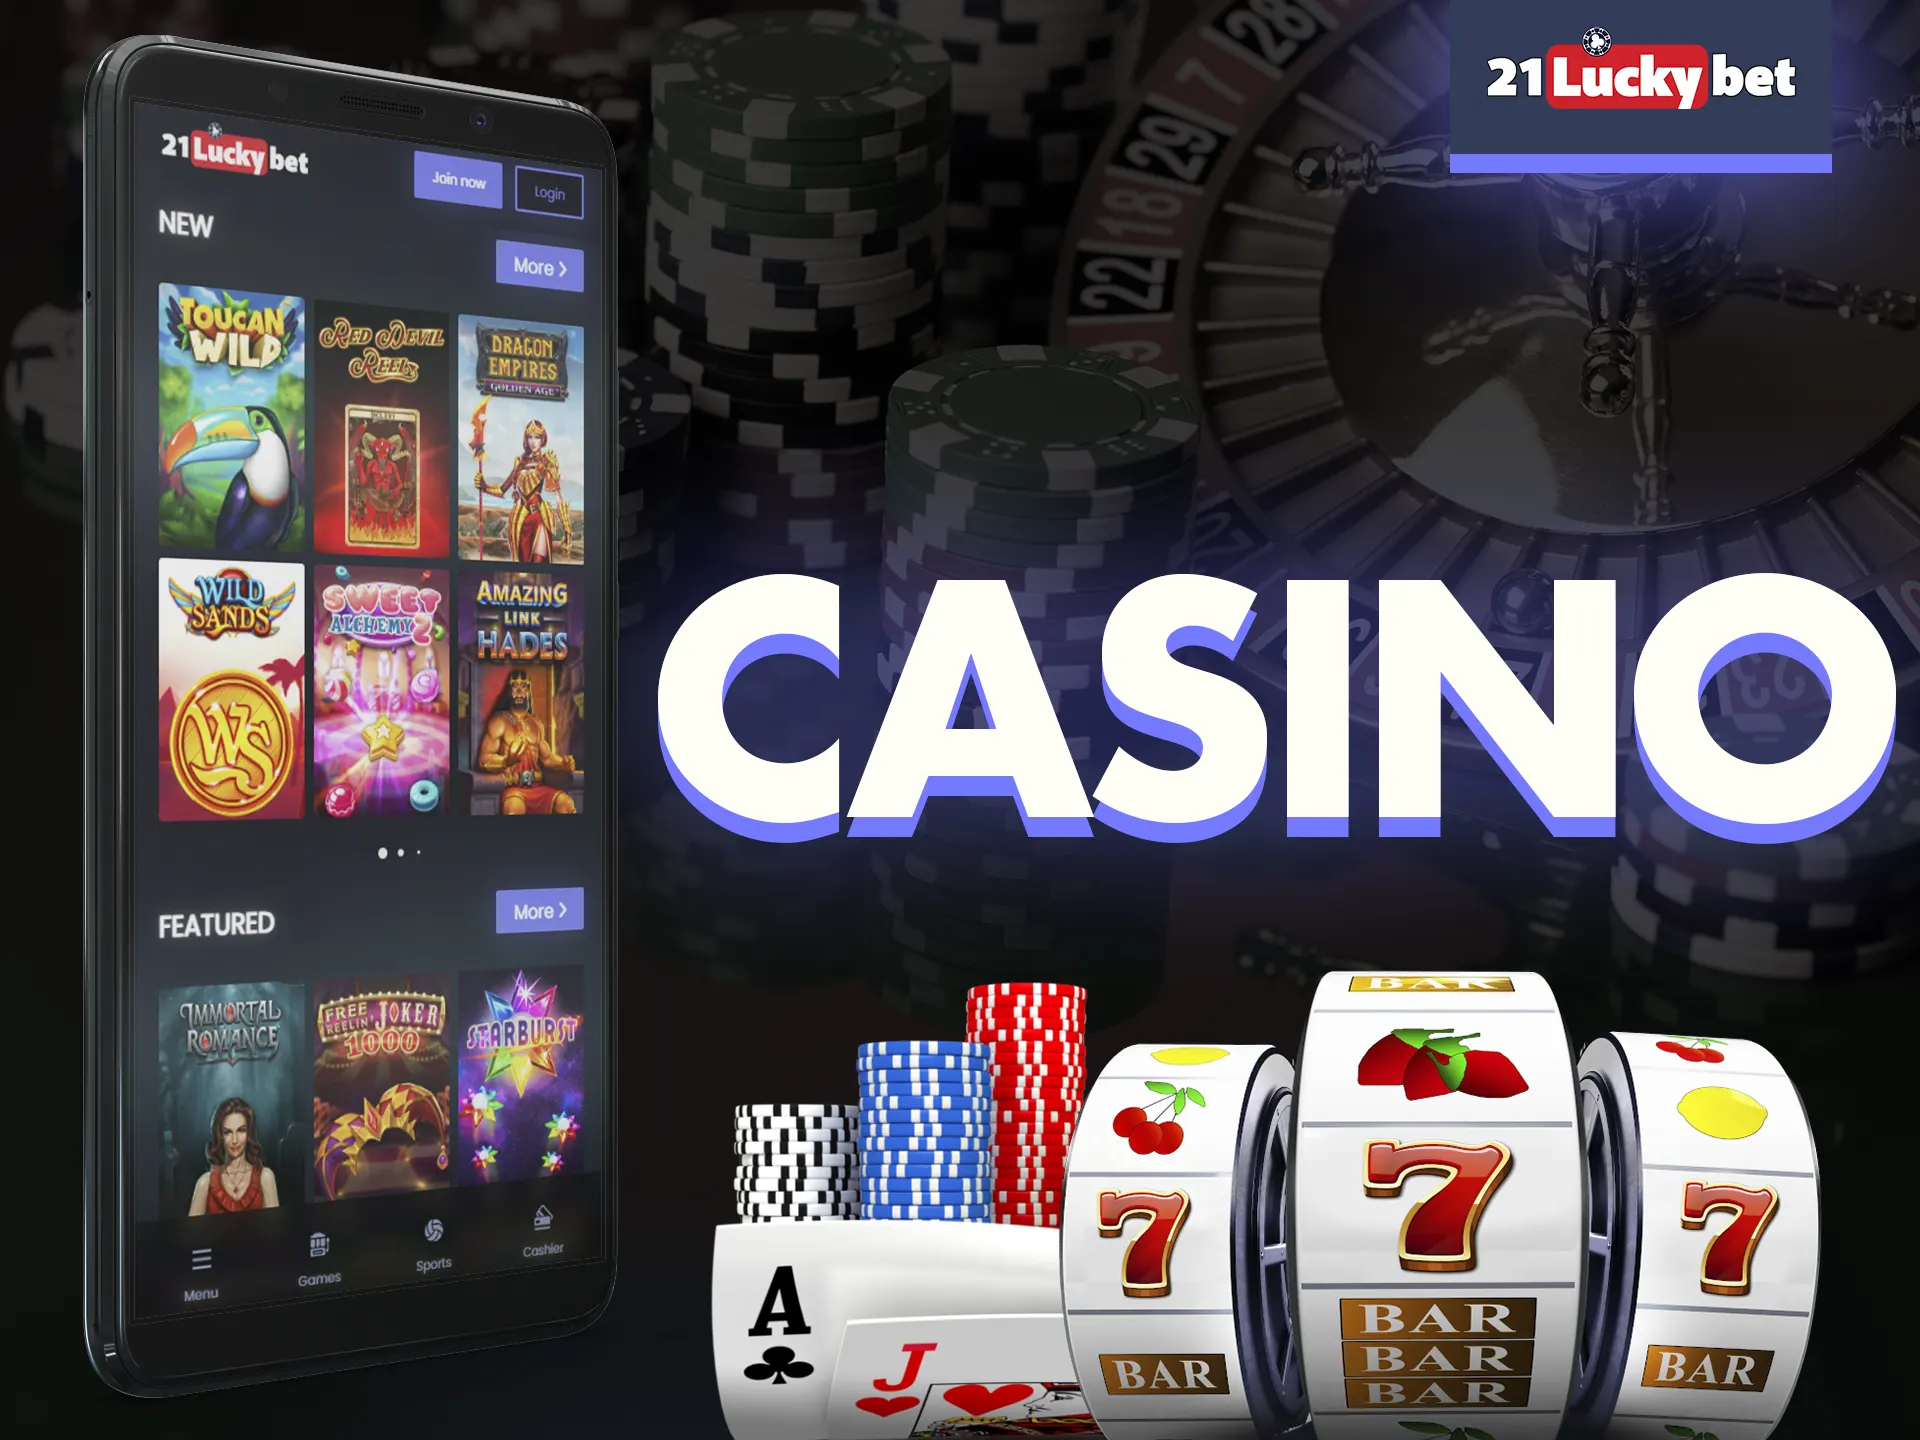 In 21luckybet app make sure you go to the casino.